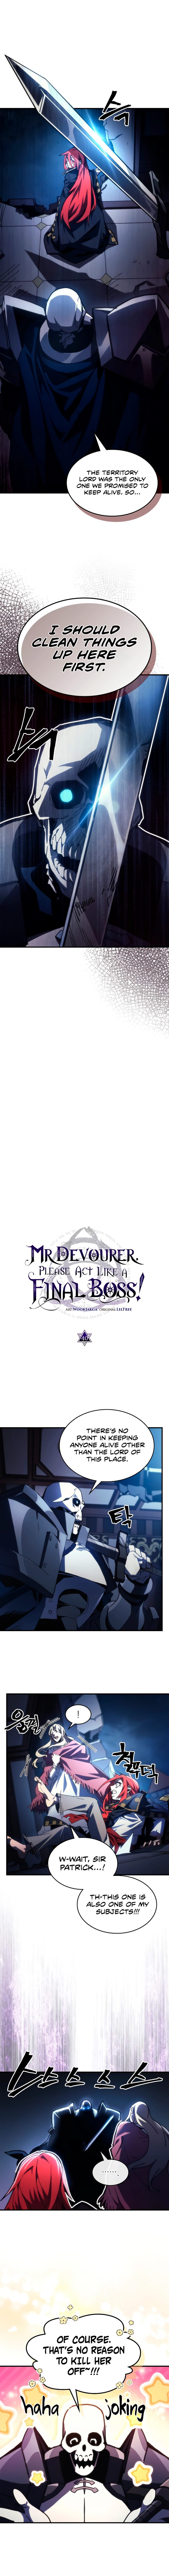 Mr Devourer, Please Act Like a Final Boss - Chapter 40 Page 2